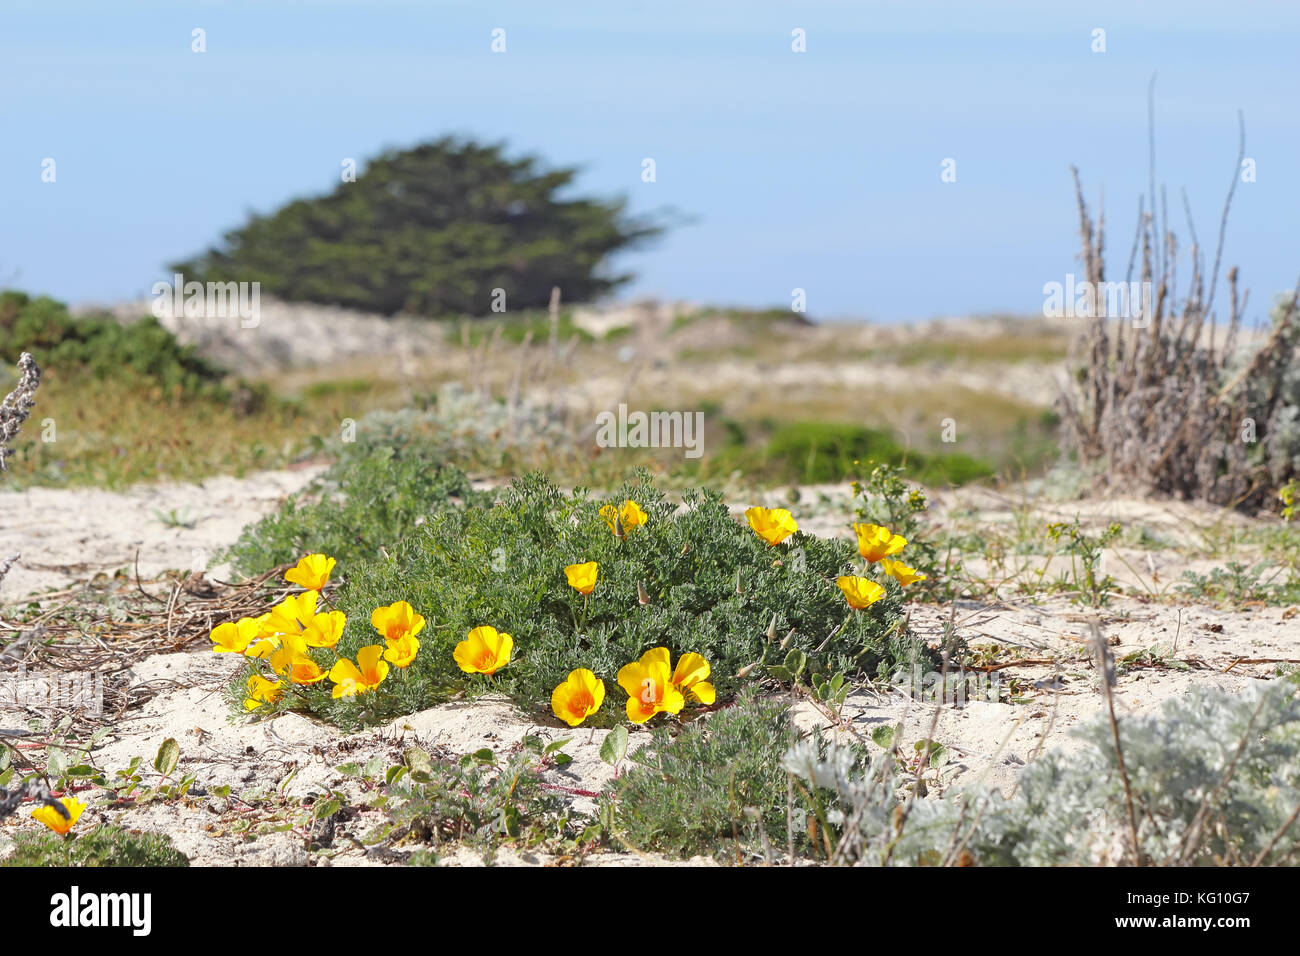 Bright orange flowers of a clump of California poppies (Eschscholzia californica variety maritima) growing on a sand dune at Asilomar State Beach in P Stock Photo